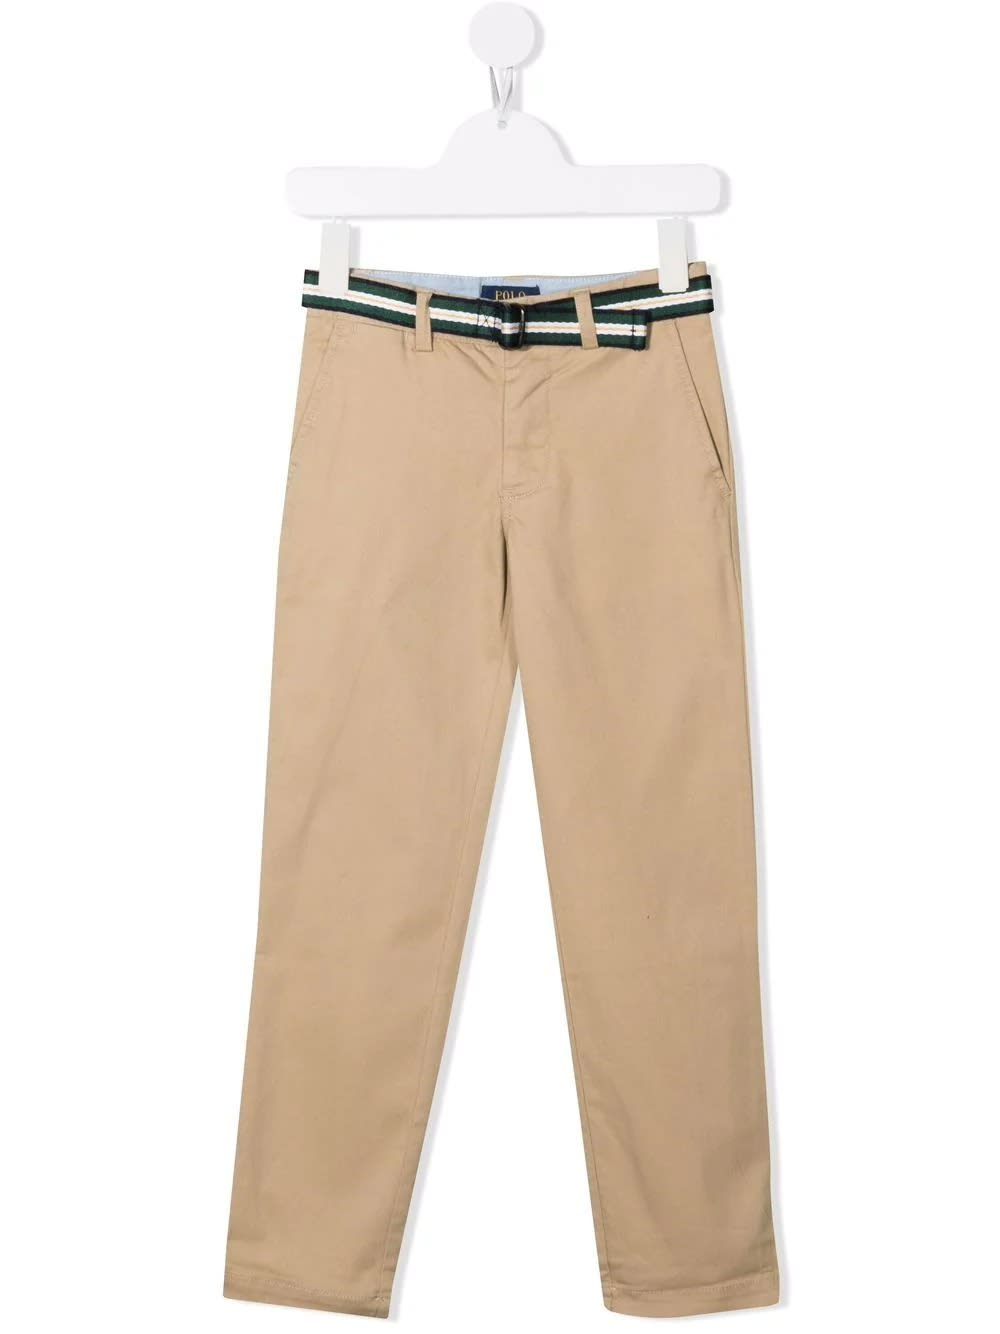 Ralph Lauren Kids Trousers In Classic Khaki Stretch Chino With Belt